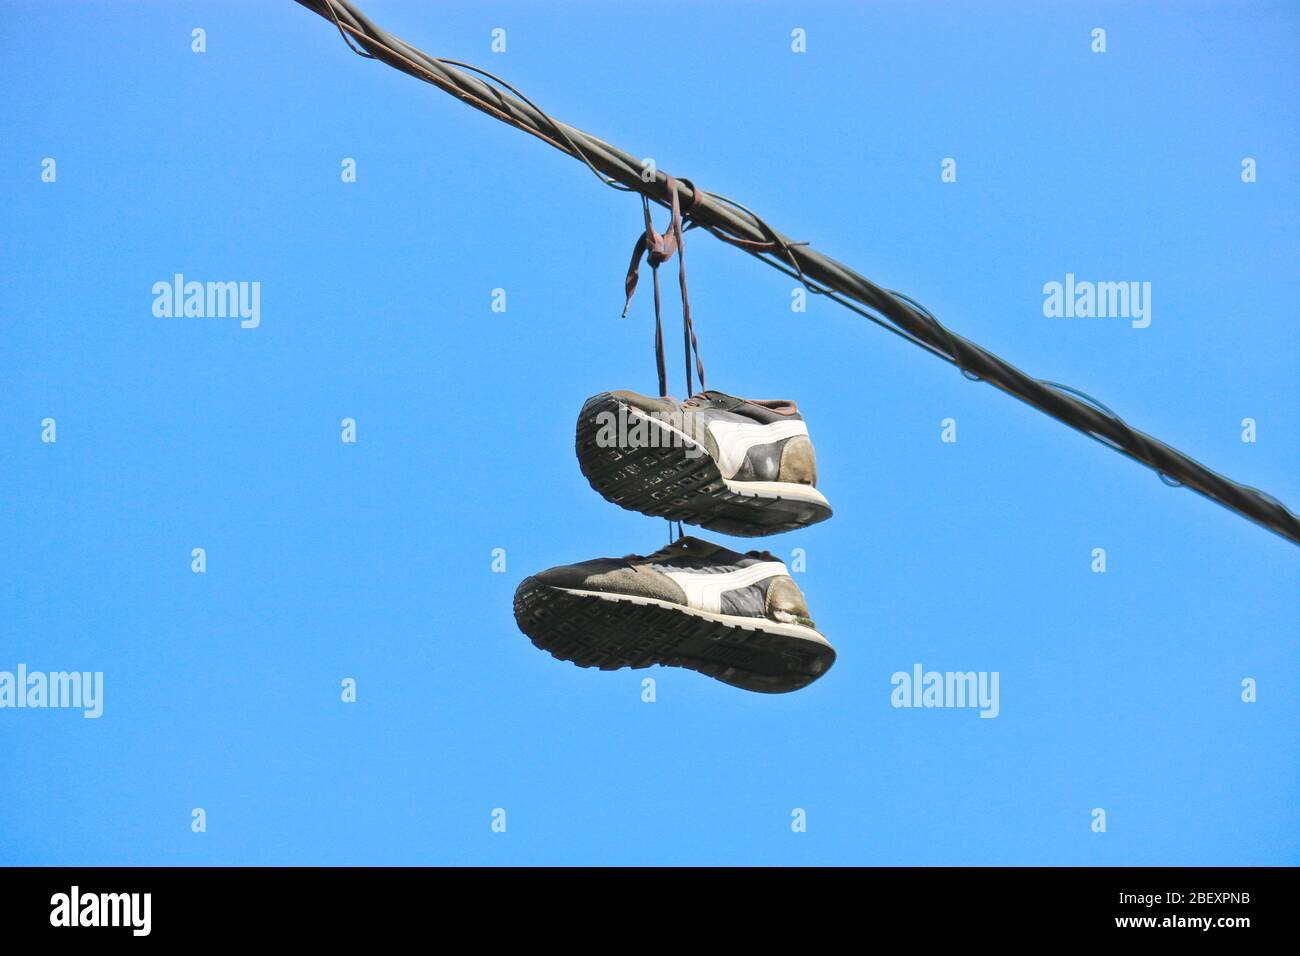 A pair of old sneakers on telephone wires in the city. Stock Photo